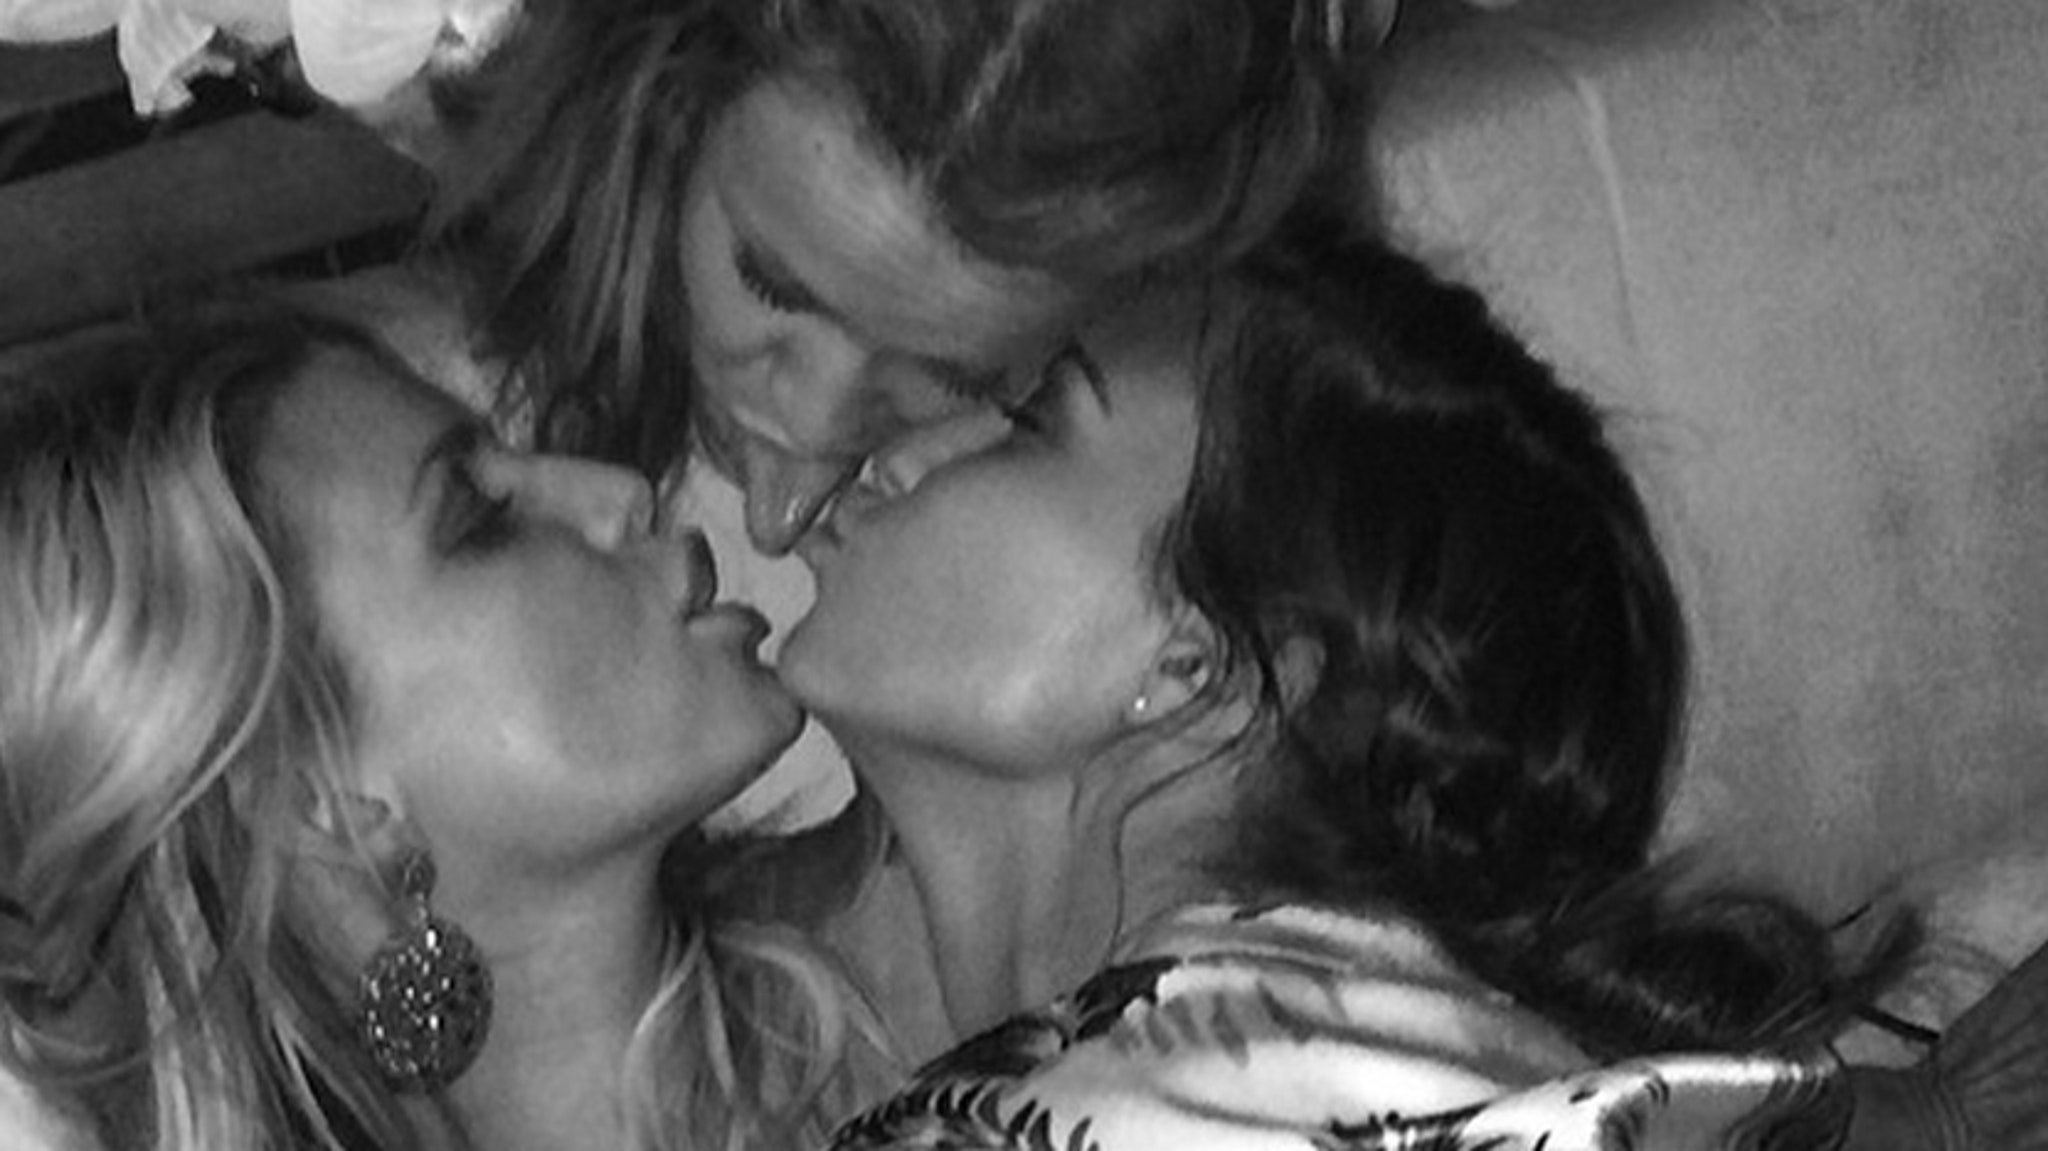 Jessica Simpson Shares Three-Way Kiss With Girlfriends -- See the Racy Pic!...